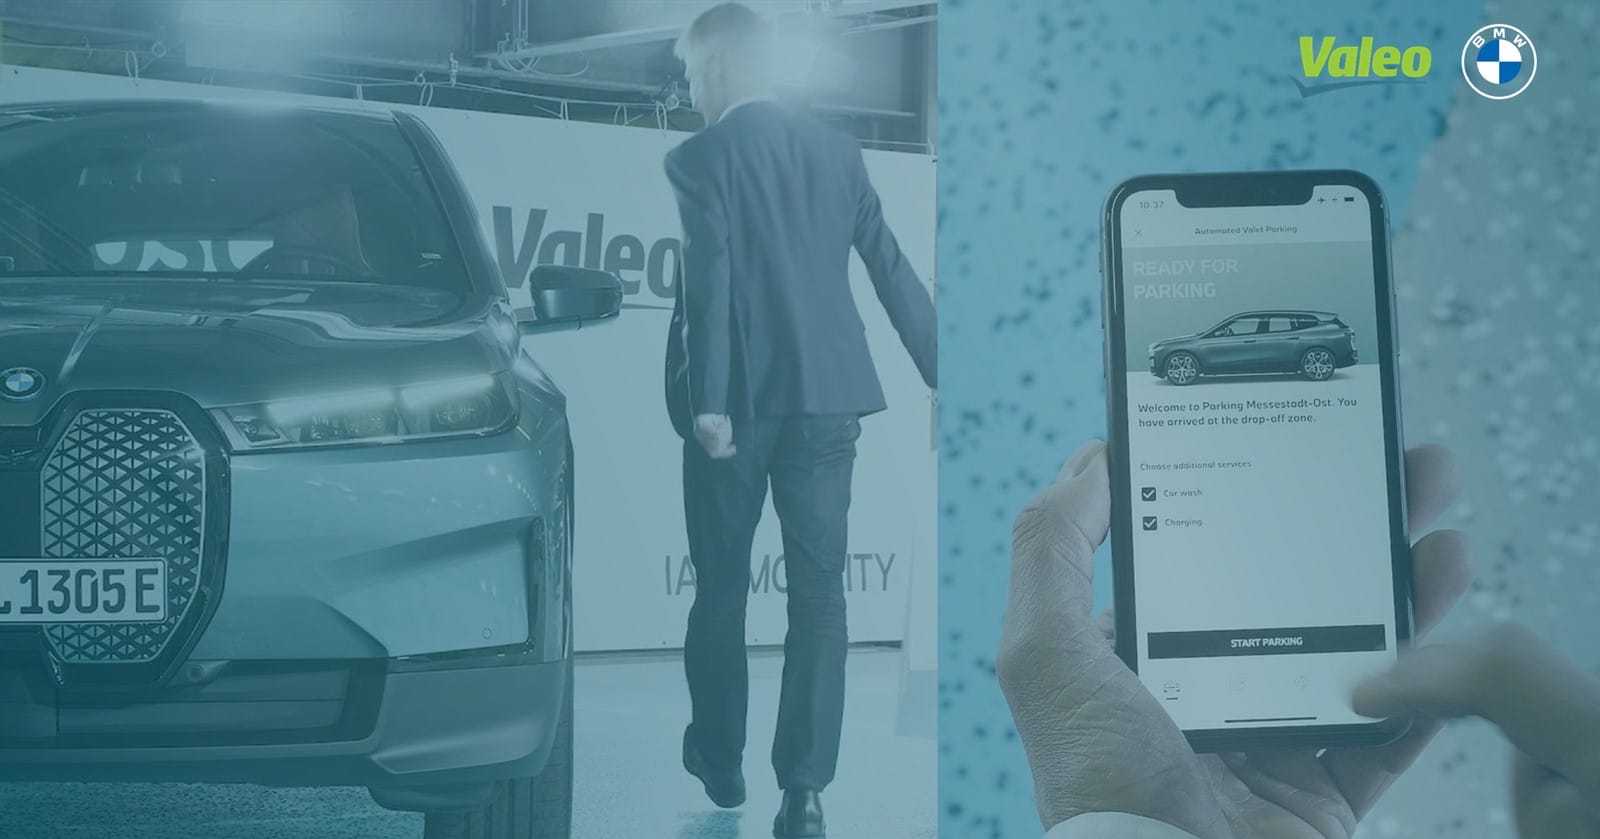 BMW and Valeo Announce Strategic Partnership to Develop Next-Generation Automated Parking Technology